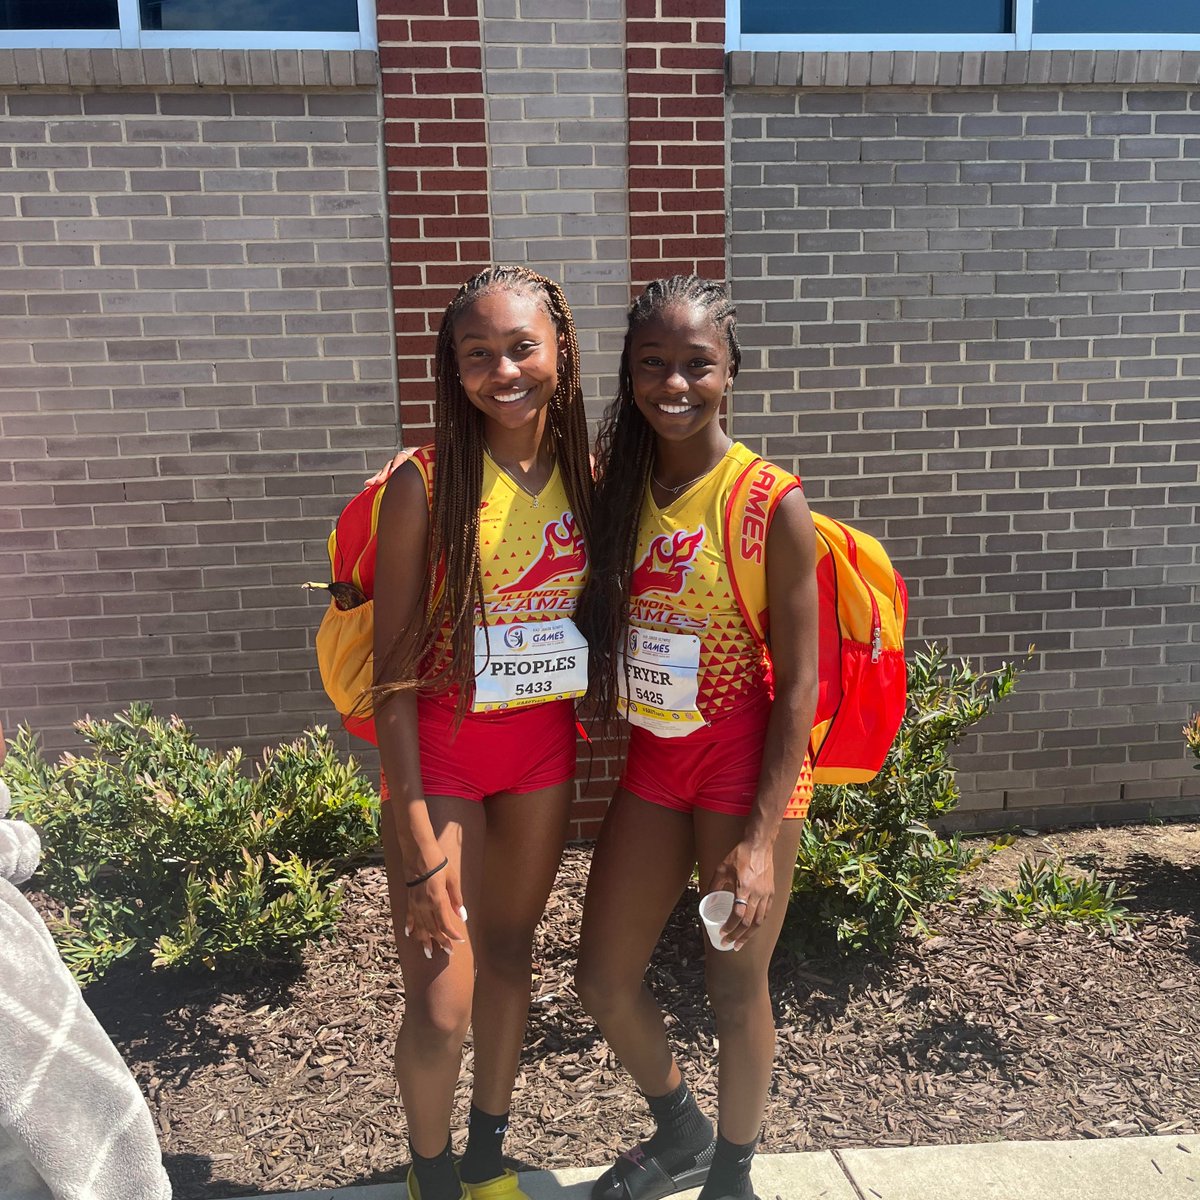 Bethany Peoples '23 (on the left) finished 20th in the nation at this year’s Junior Olympics in track at North Carolina A&T. Great job, Bethany! #CelebrateMarian